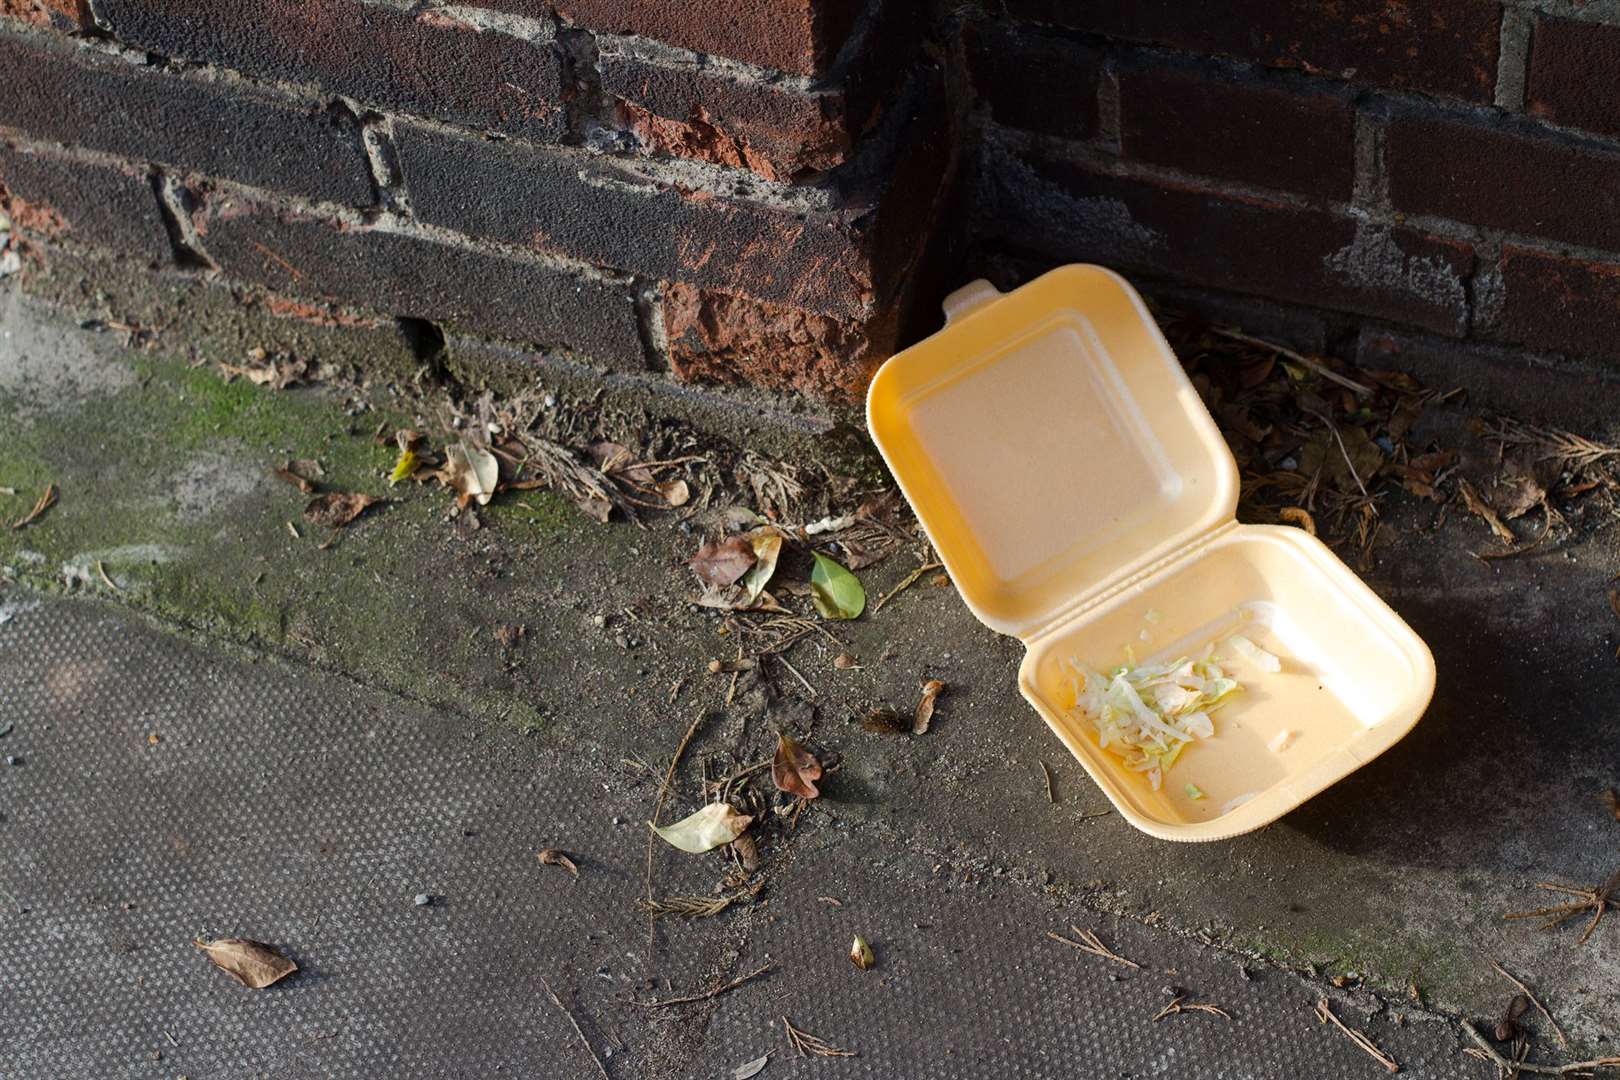 Rubbish from takeaways is often a common sight on UK high streets